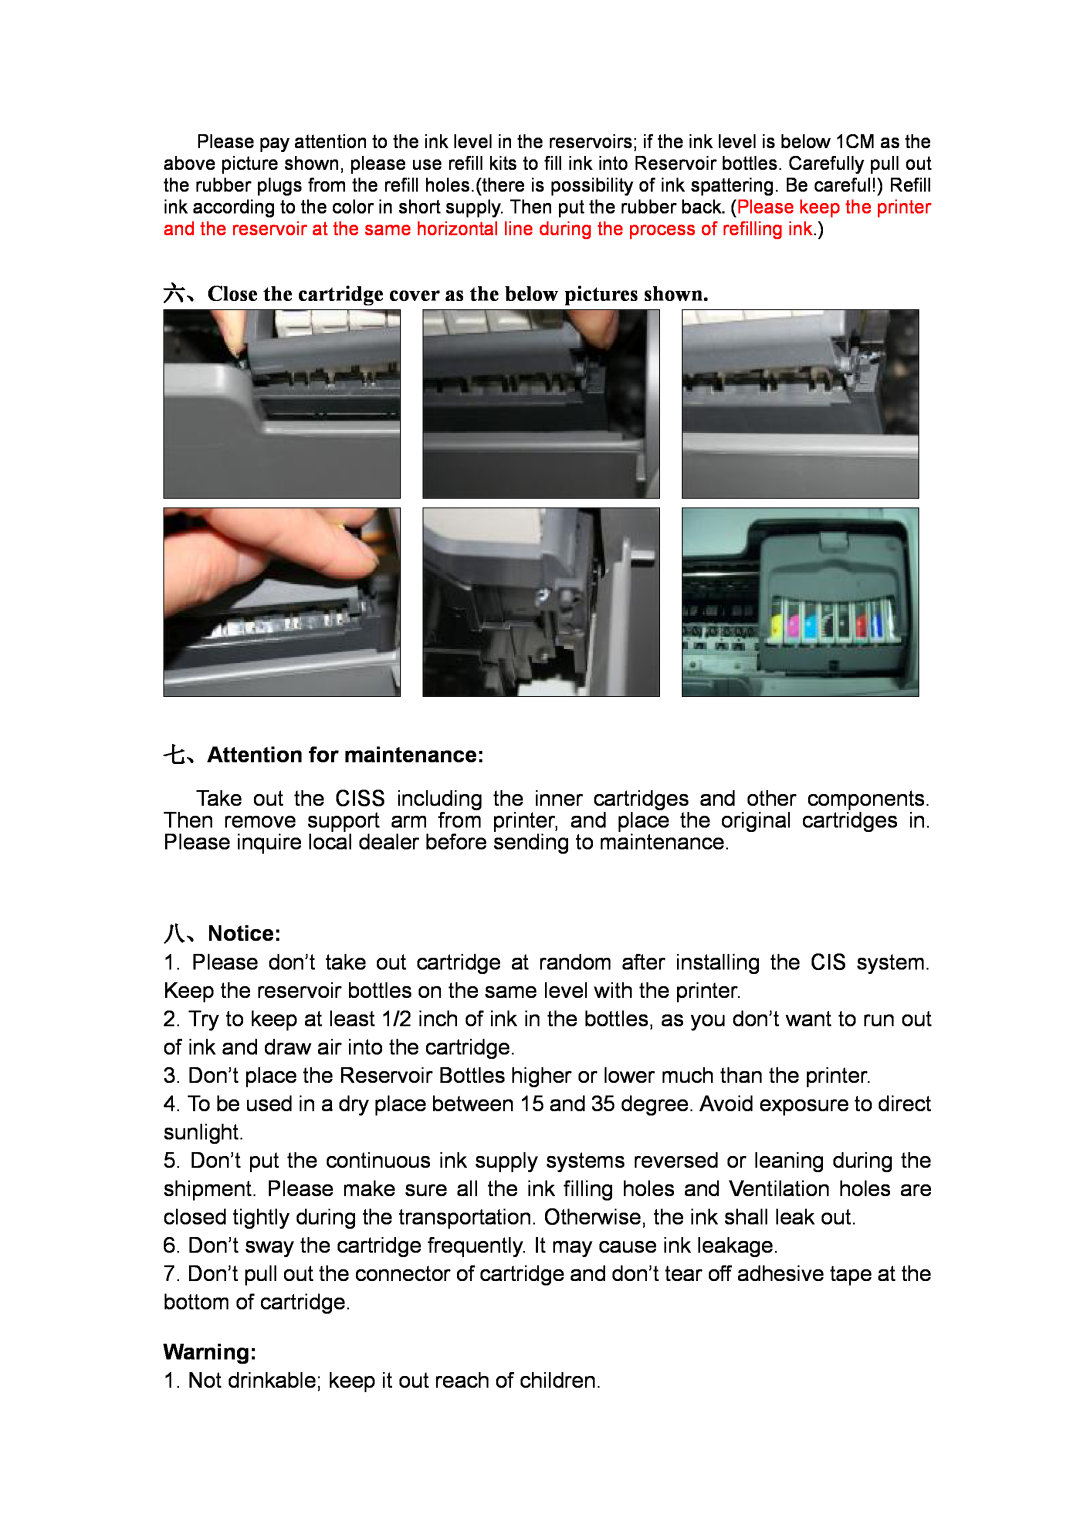 Epson R800 manual 六、Close the cartridge cover as the below pictures shown, 七、Attention for maintenance, 八、Notice 